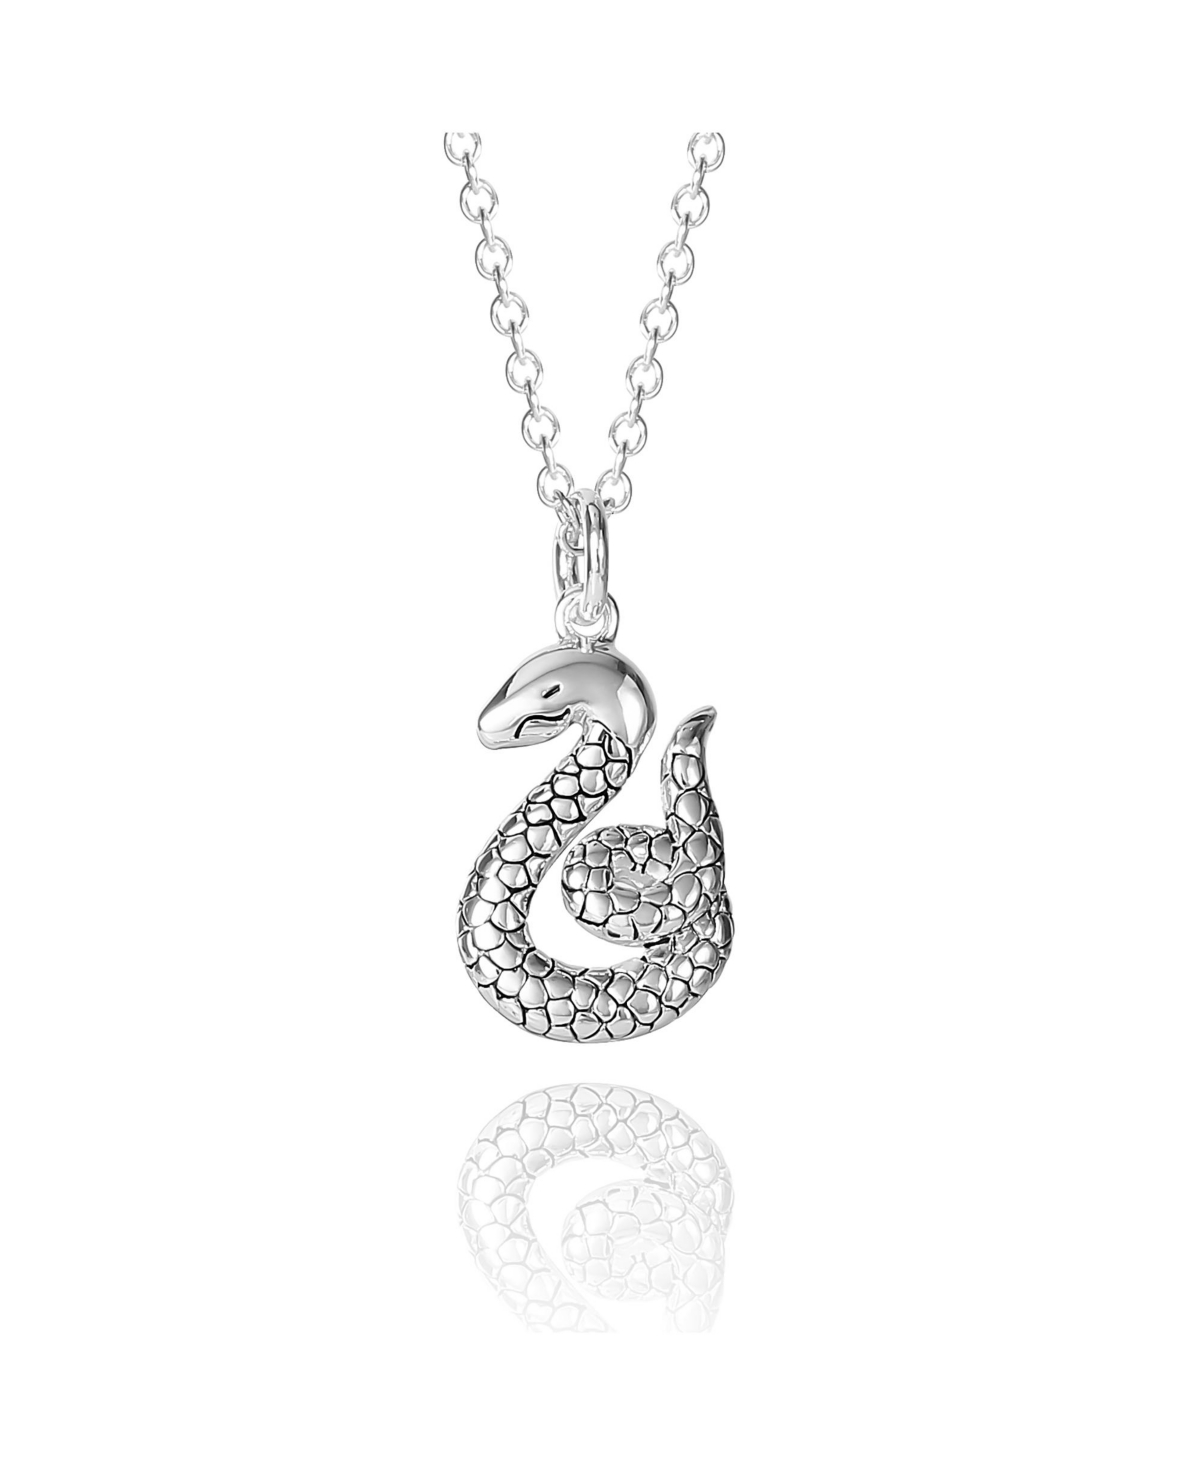 Womens Silver Flash Plated Nagini Snake Necklace, 18'' - Silver tone